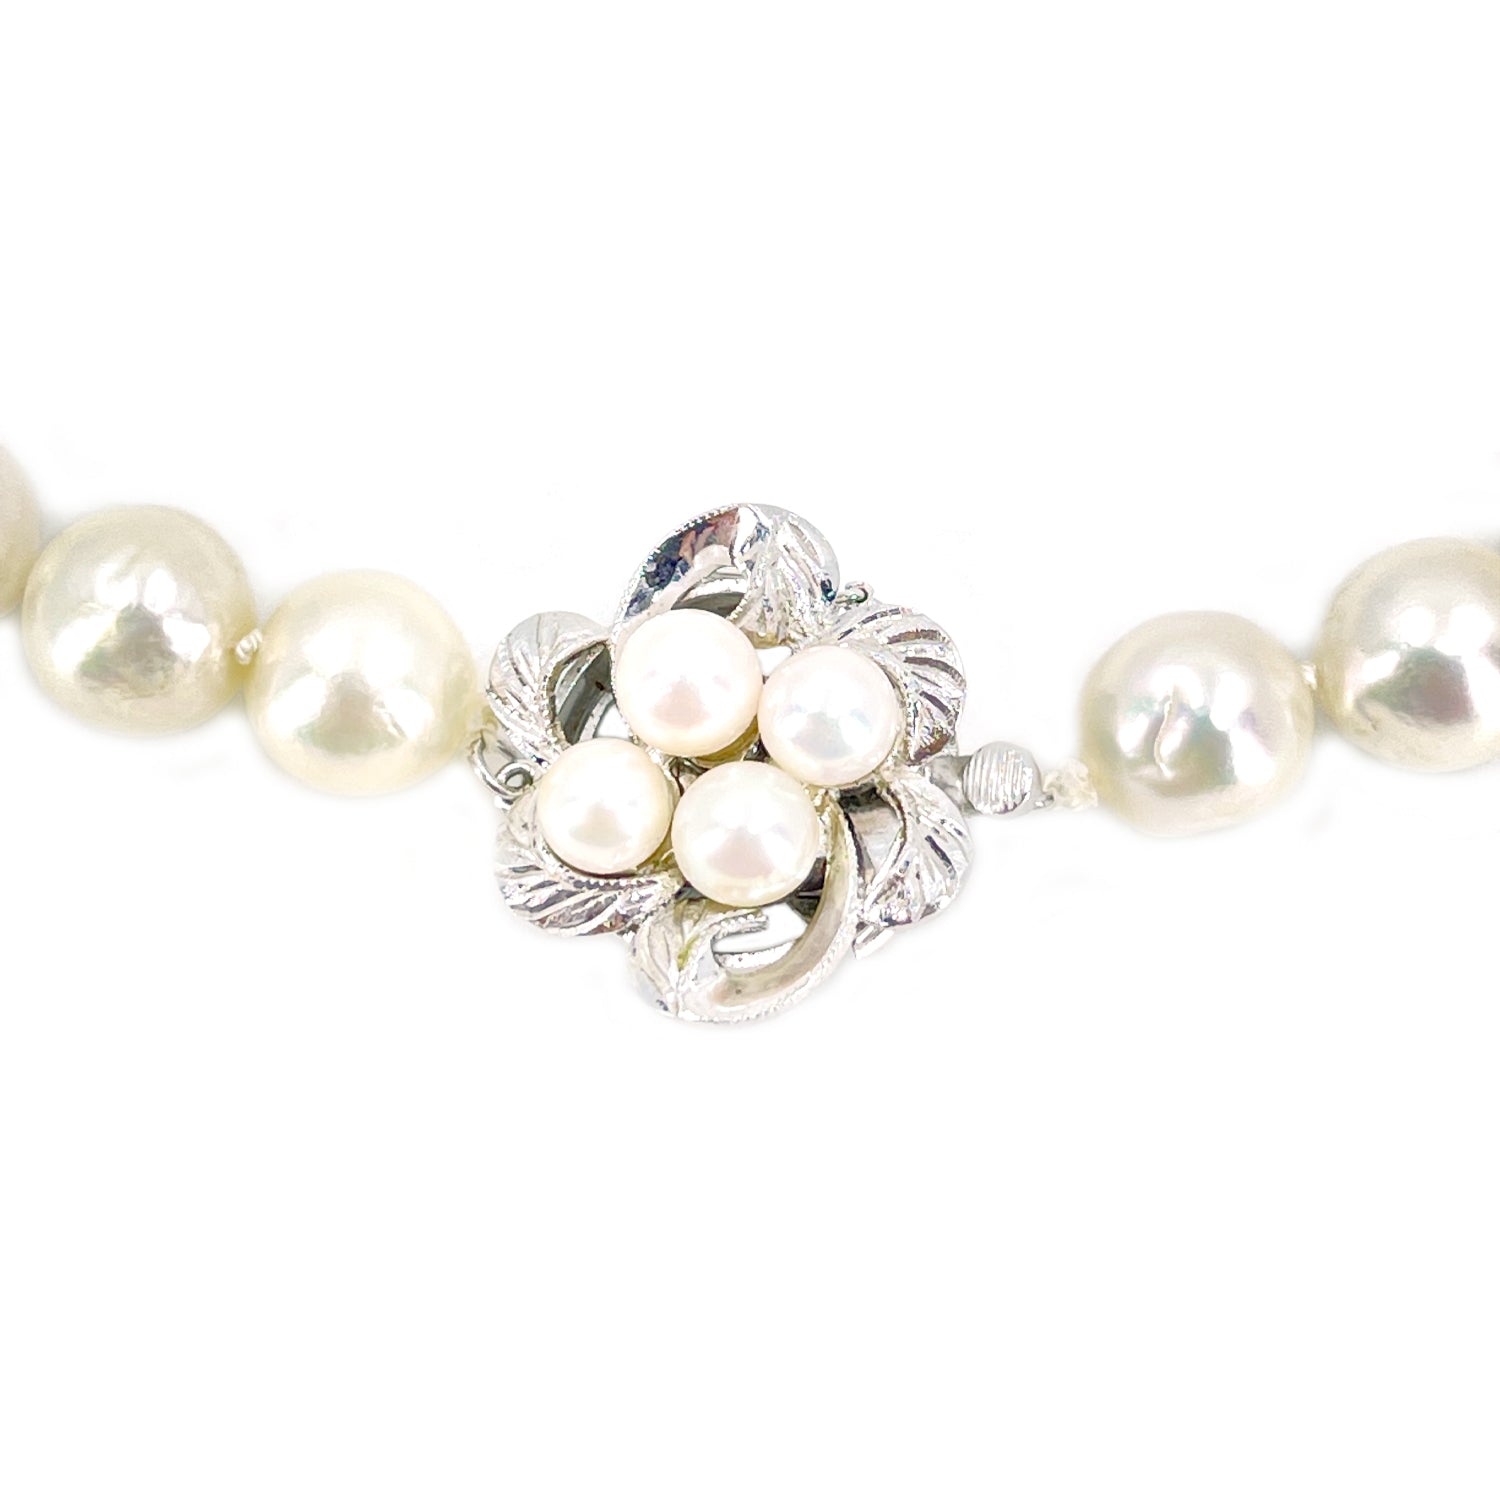 Atomic Modernist Japanese Baroque Saltwater Cultured Akoya Pearl Necklace - Sterling Silver 17.50 Inch